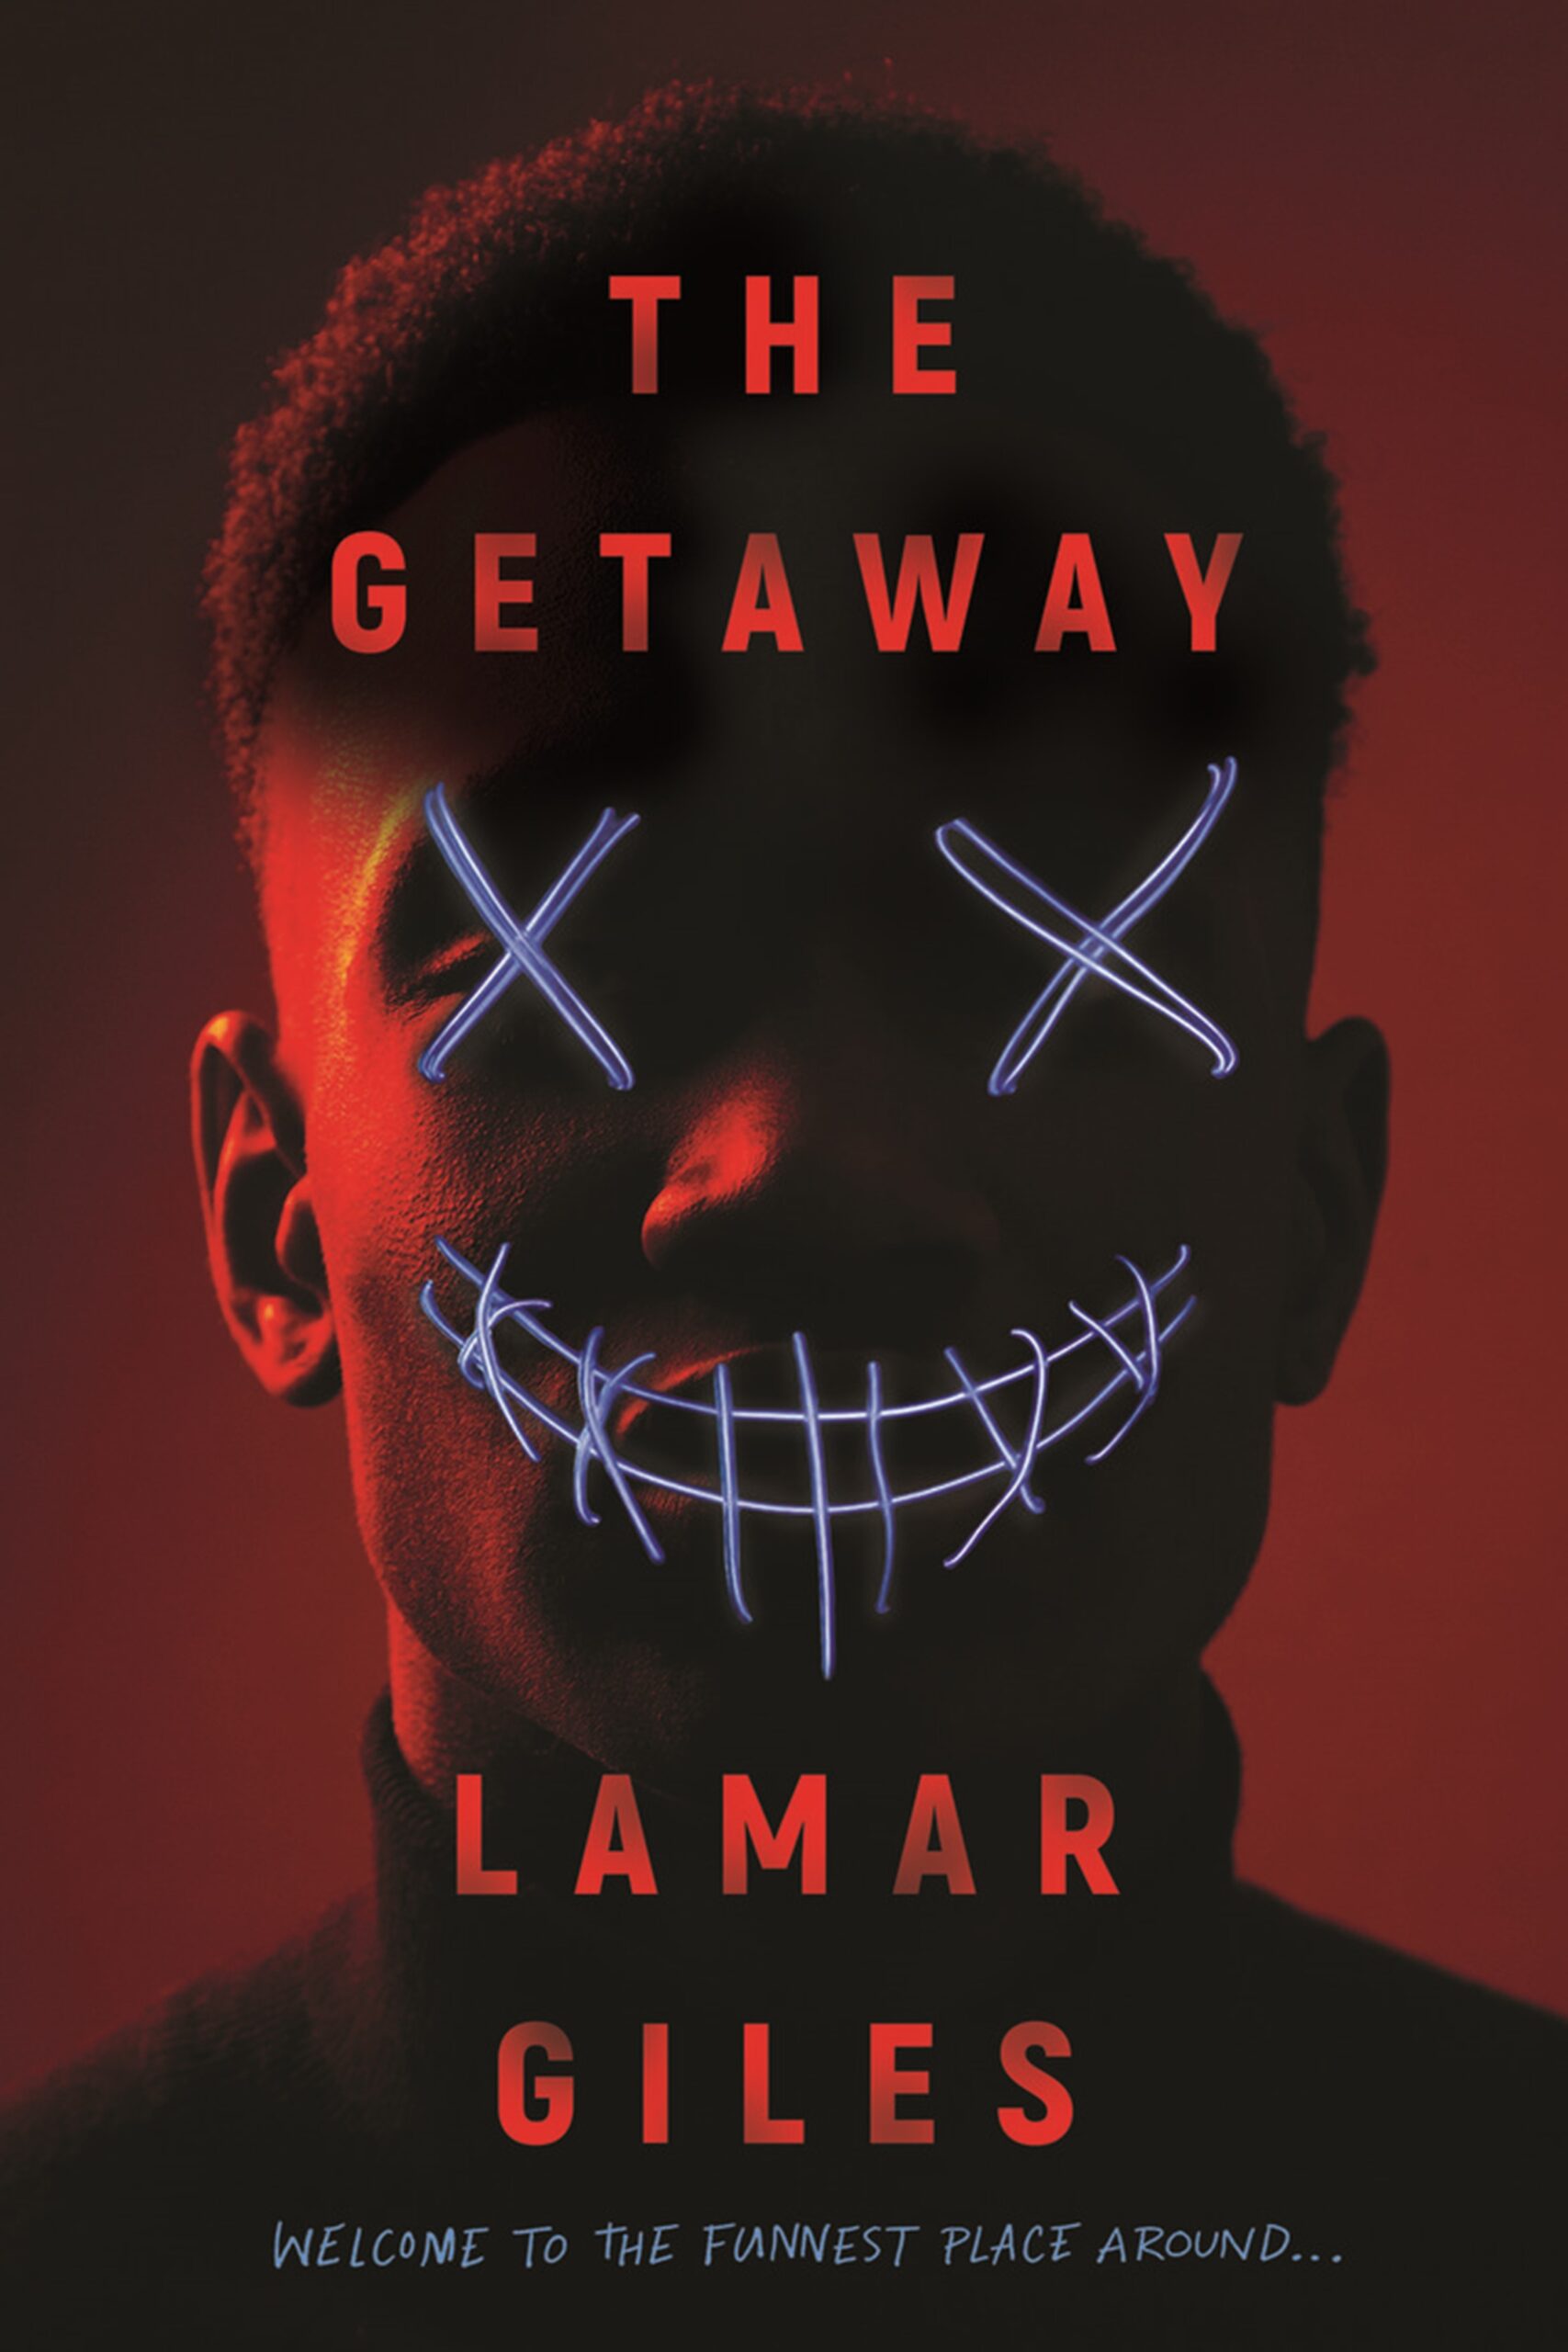 The Getaway by Lamar Giles (author) – (Scholastic Press)